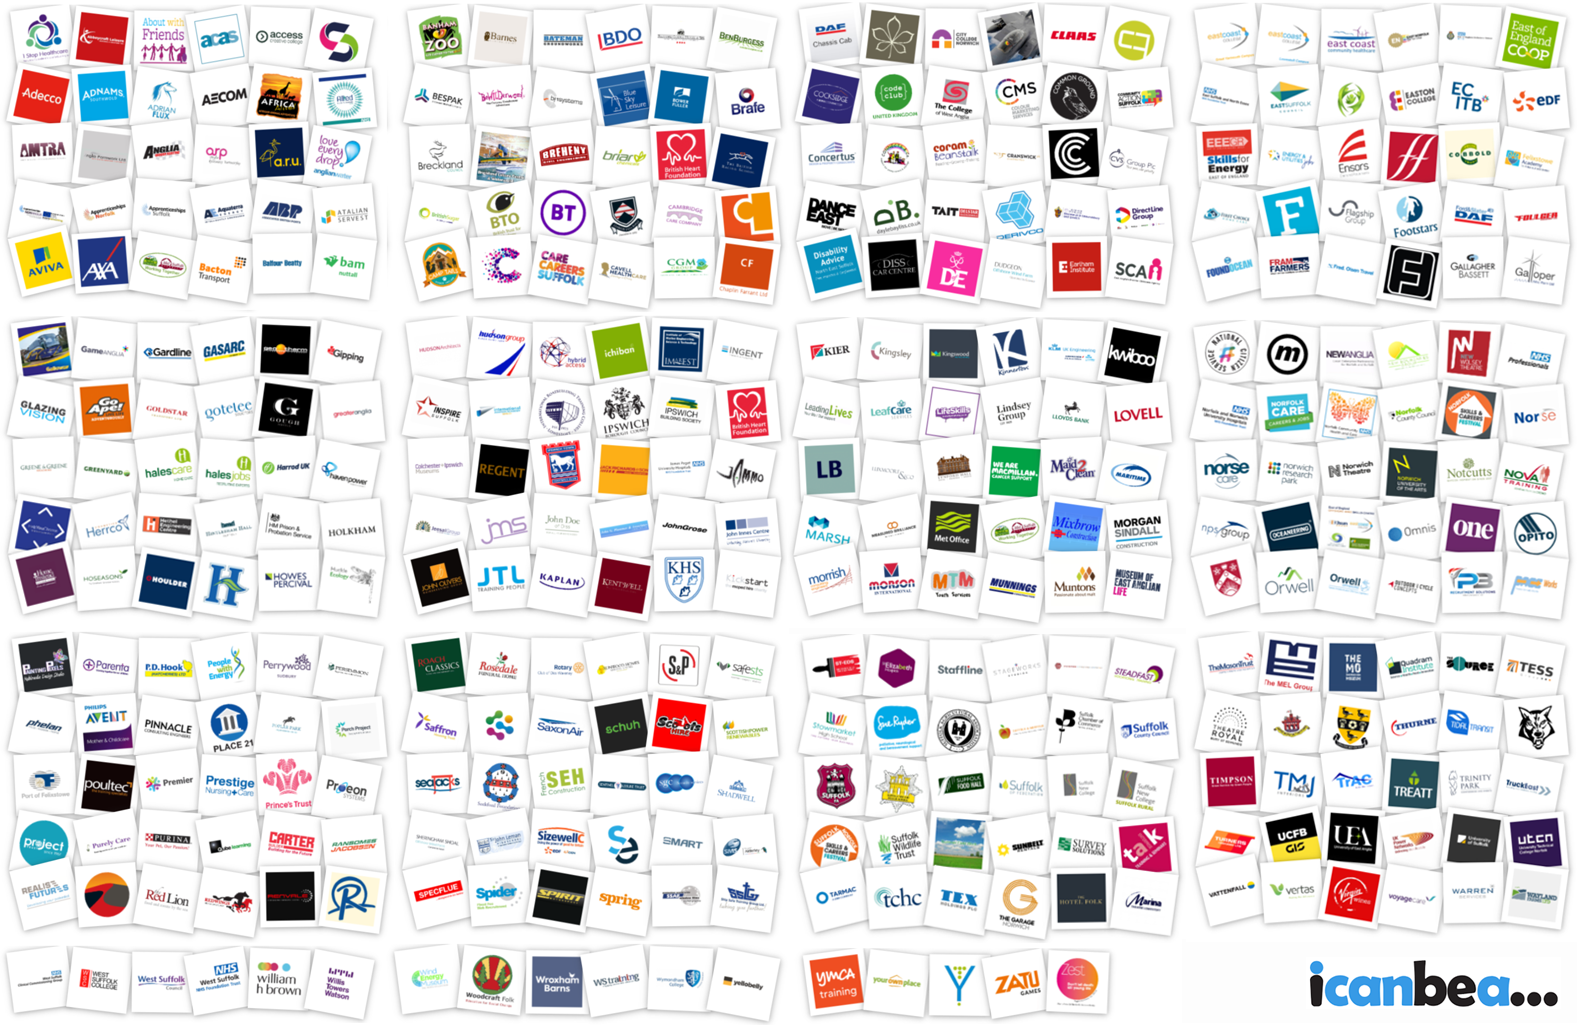 Photo Collage of icanbea... Organisations - up-to-date